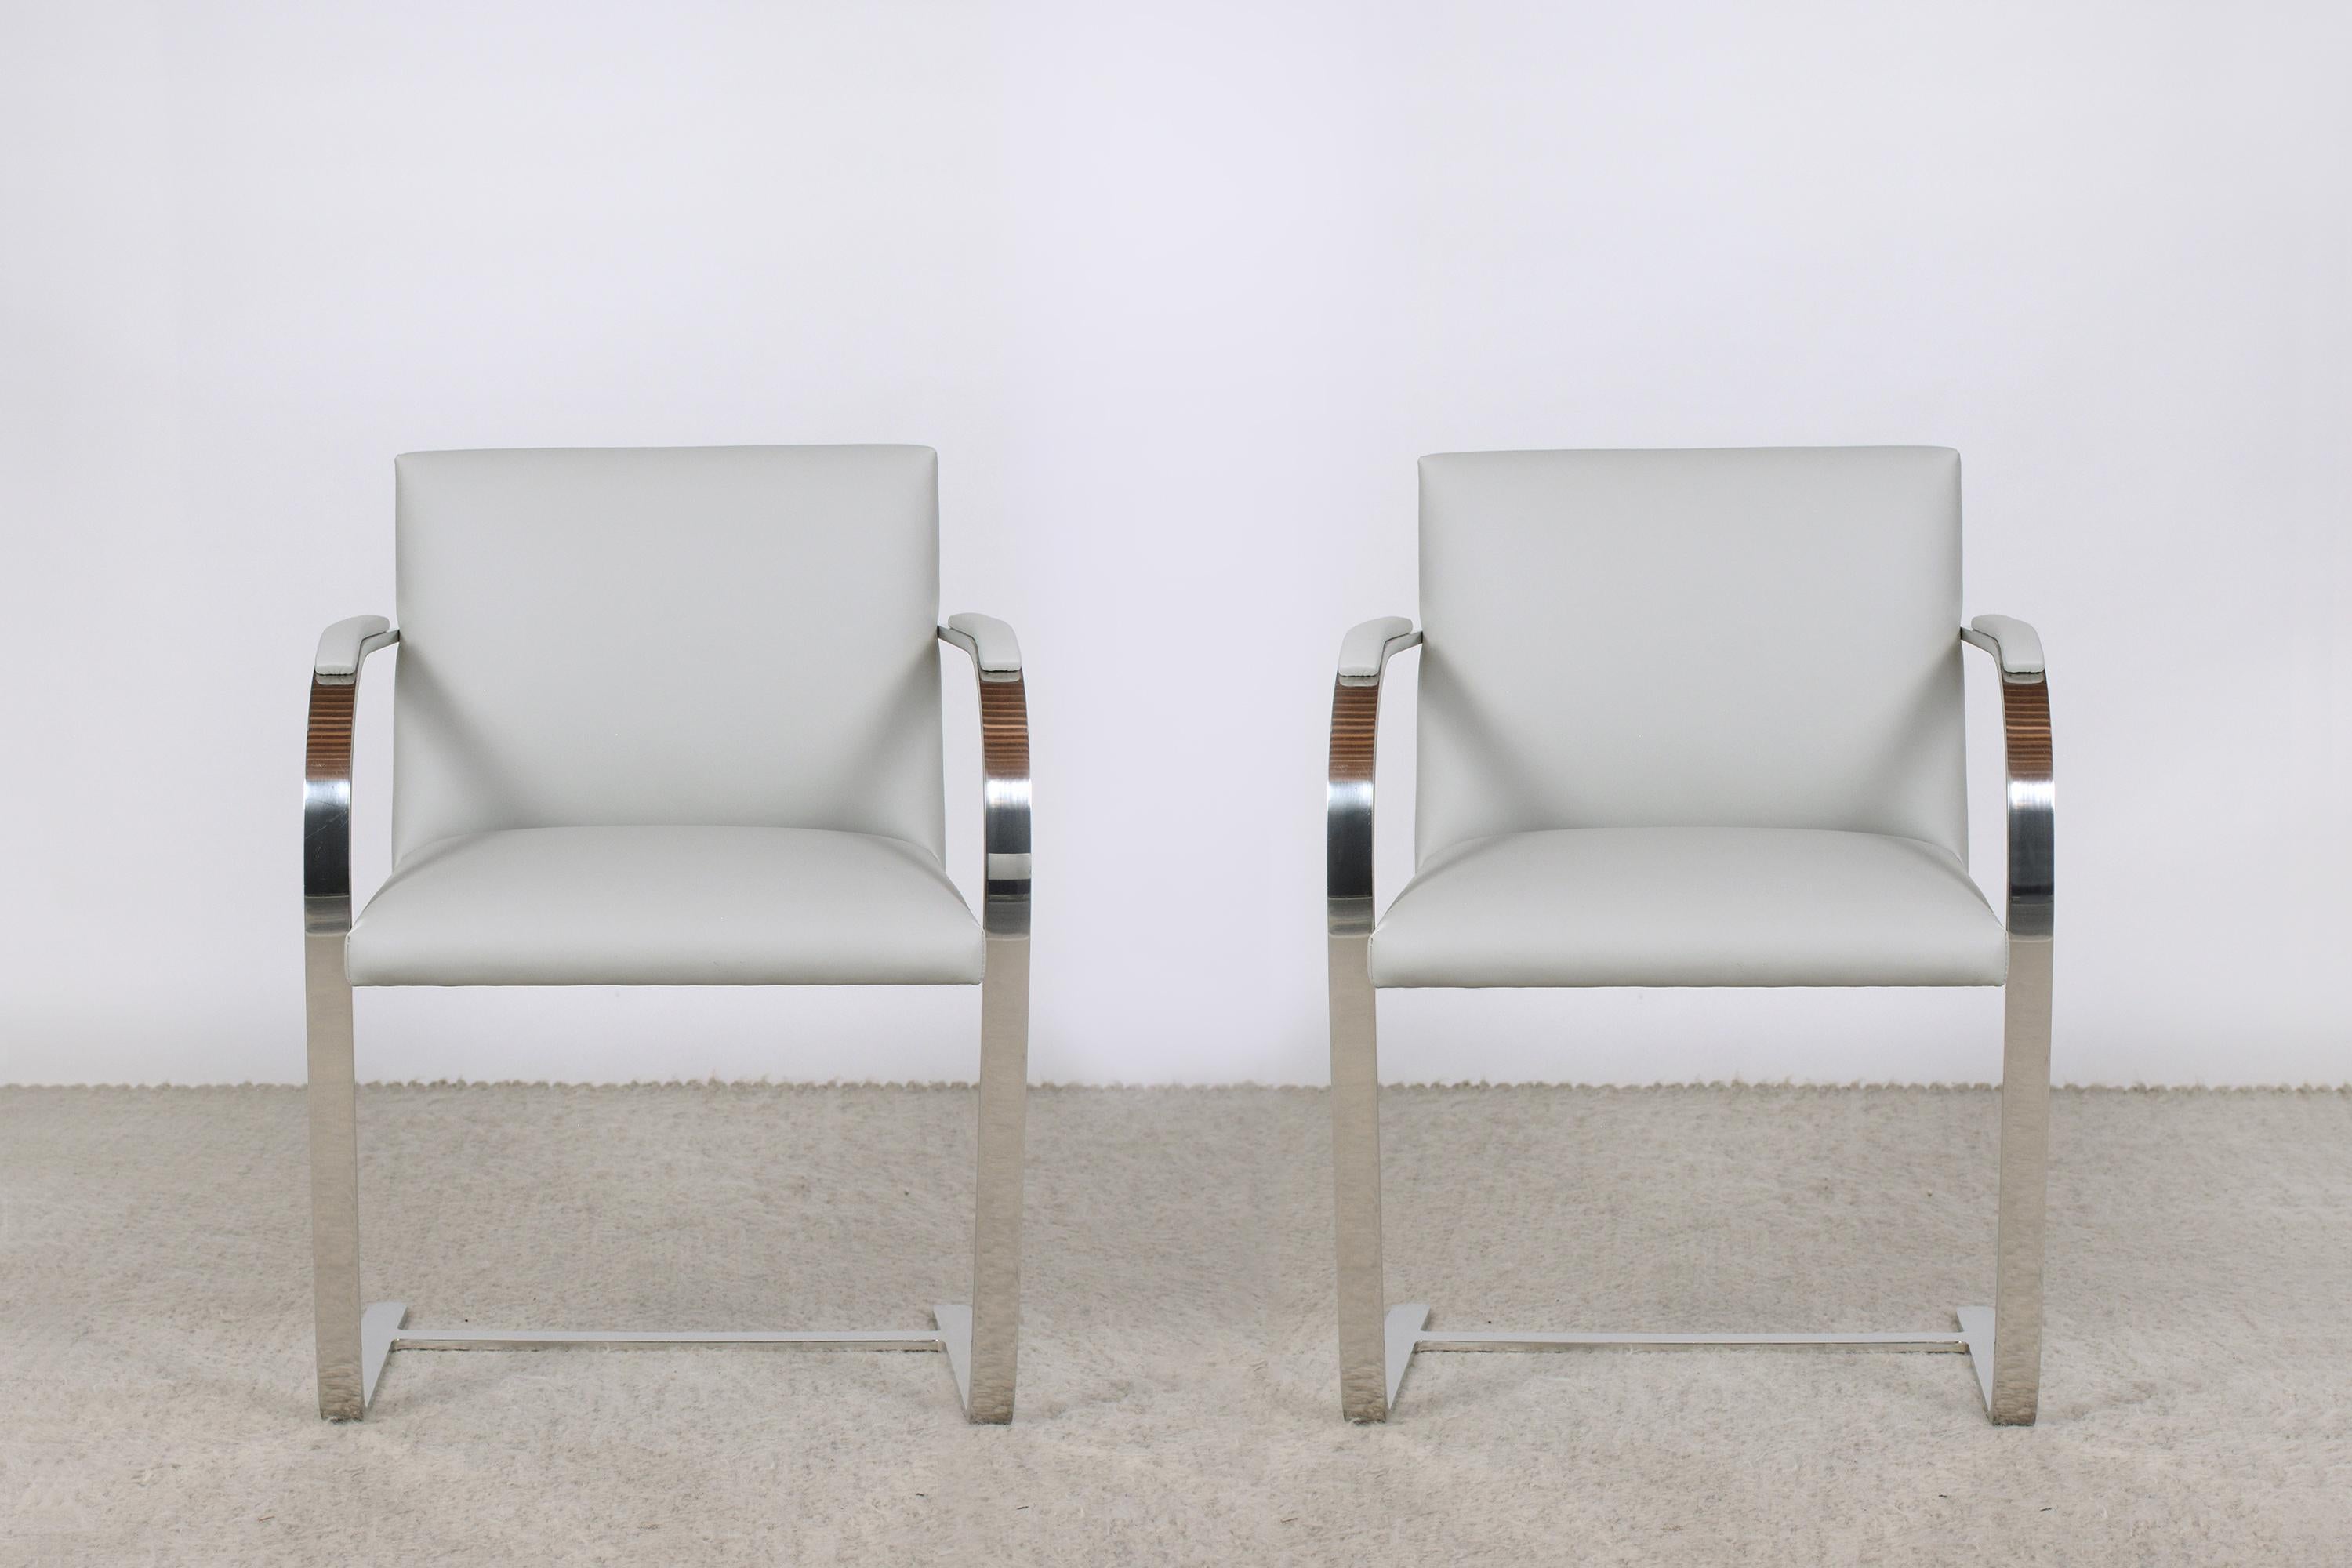 An extraordinary set of two Mies Van Der Rohe Brno Armchairs by Knoll is in great condition and has been newly upholstered by our team of expert craftsmen. The chairs have a sturdy steel frame that has been polished/buffed and is newly upholstered